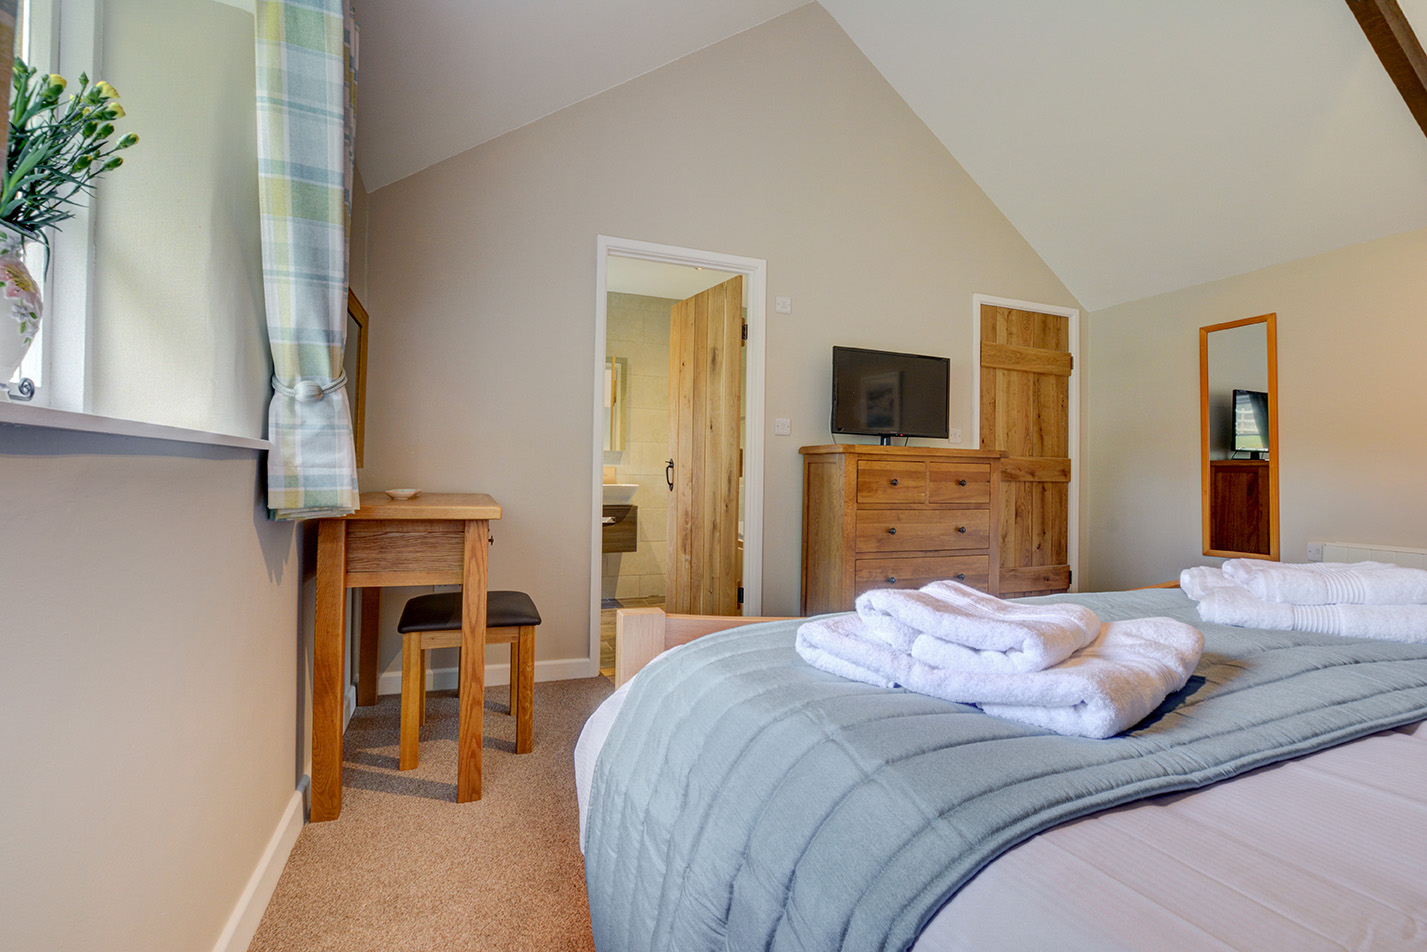 The second bedroom of Goosehill luxury self catering converted barn holiday cottage at Penrose Burden in North Cornwall 03.jpg